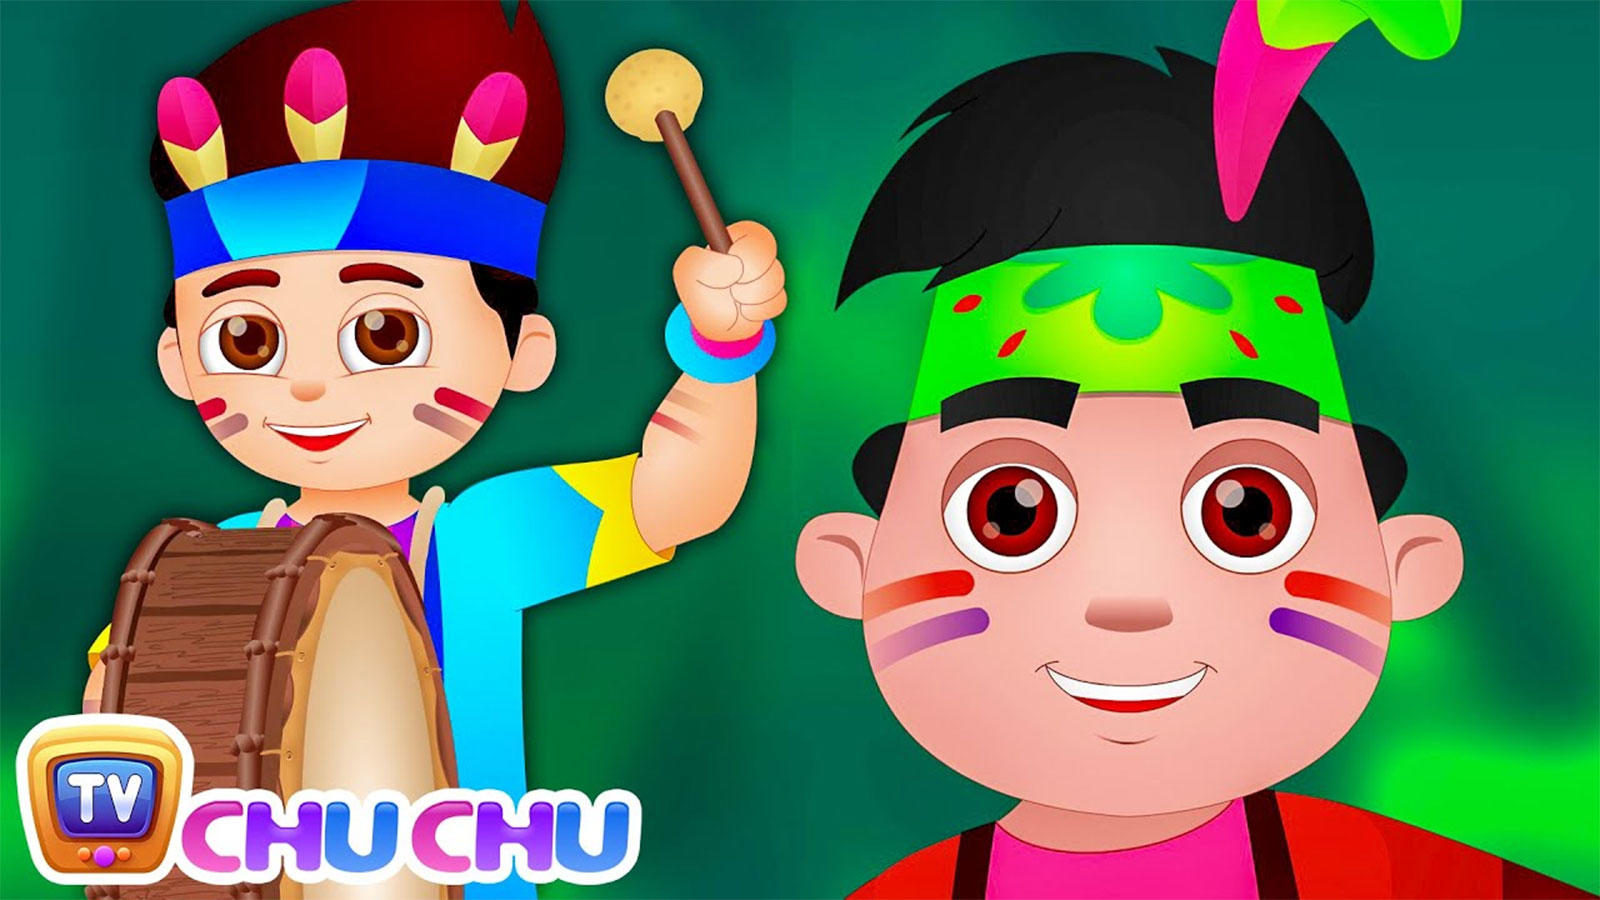 Watch Popular Kids Songs and English Nursery 'Ten Little Indians' for Kids    Check Out Children's Nursery Rhymes, Baby Songs, Fairy Tales In English